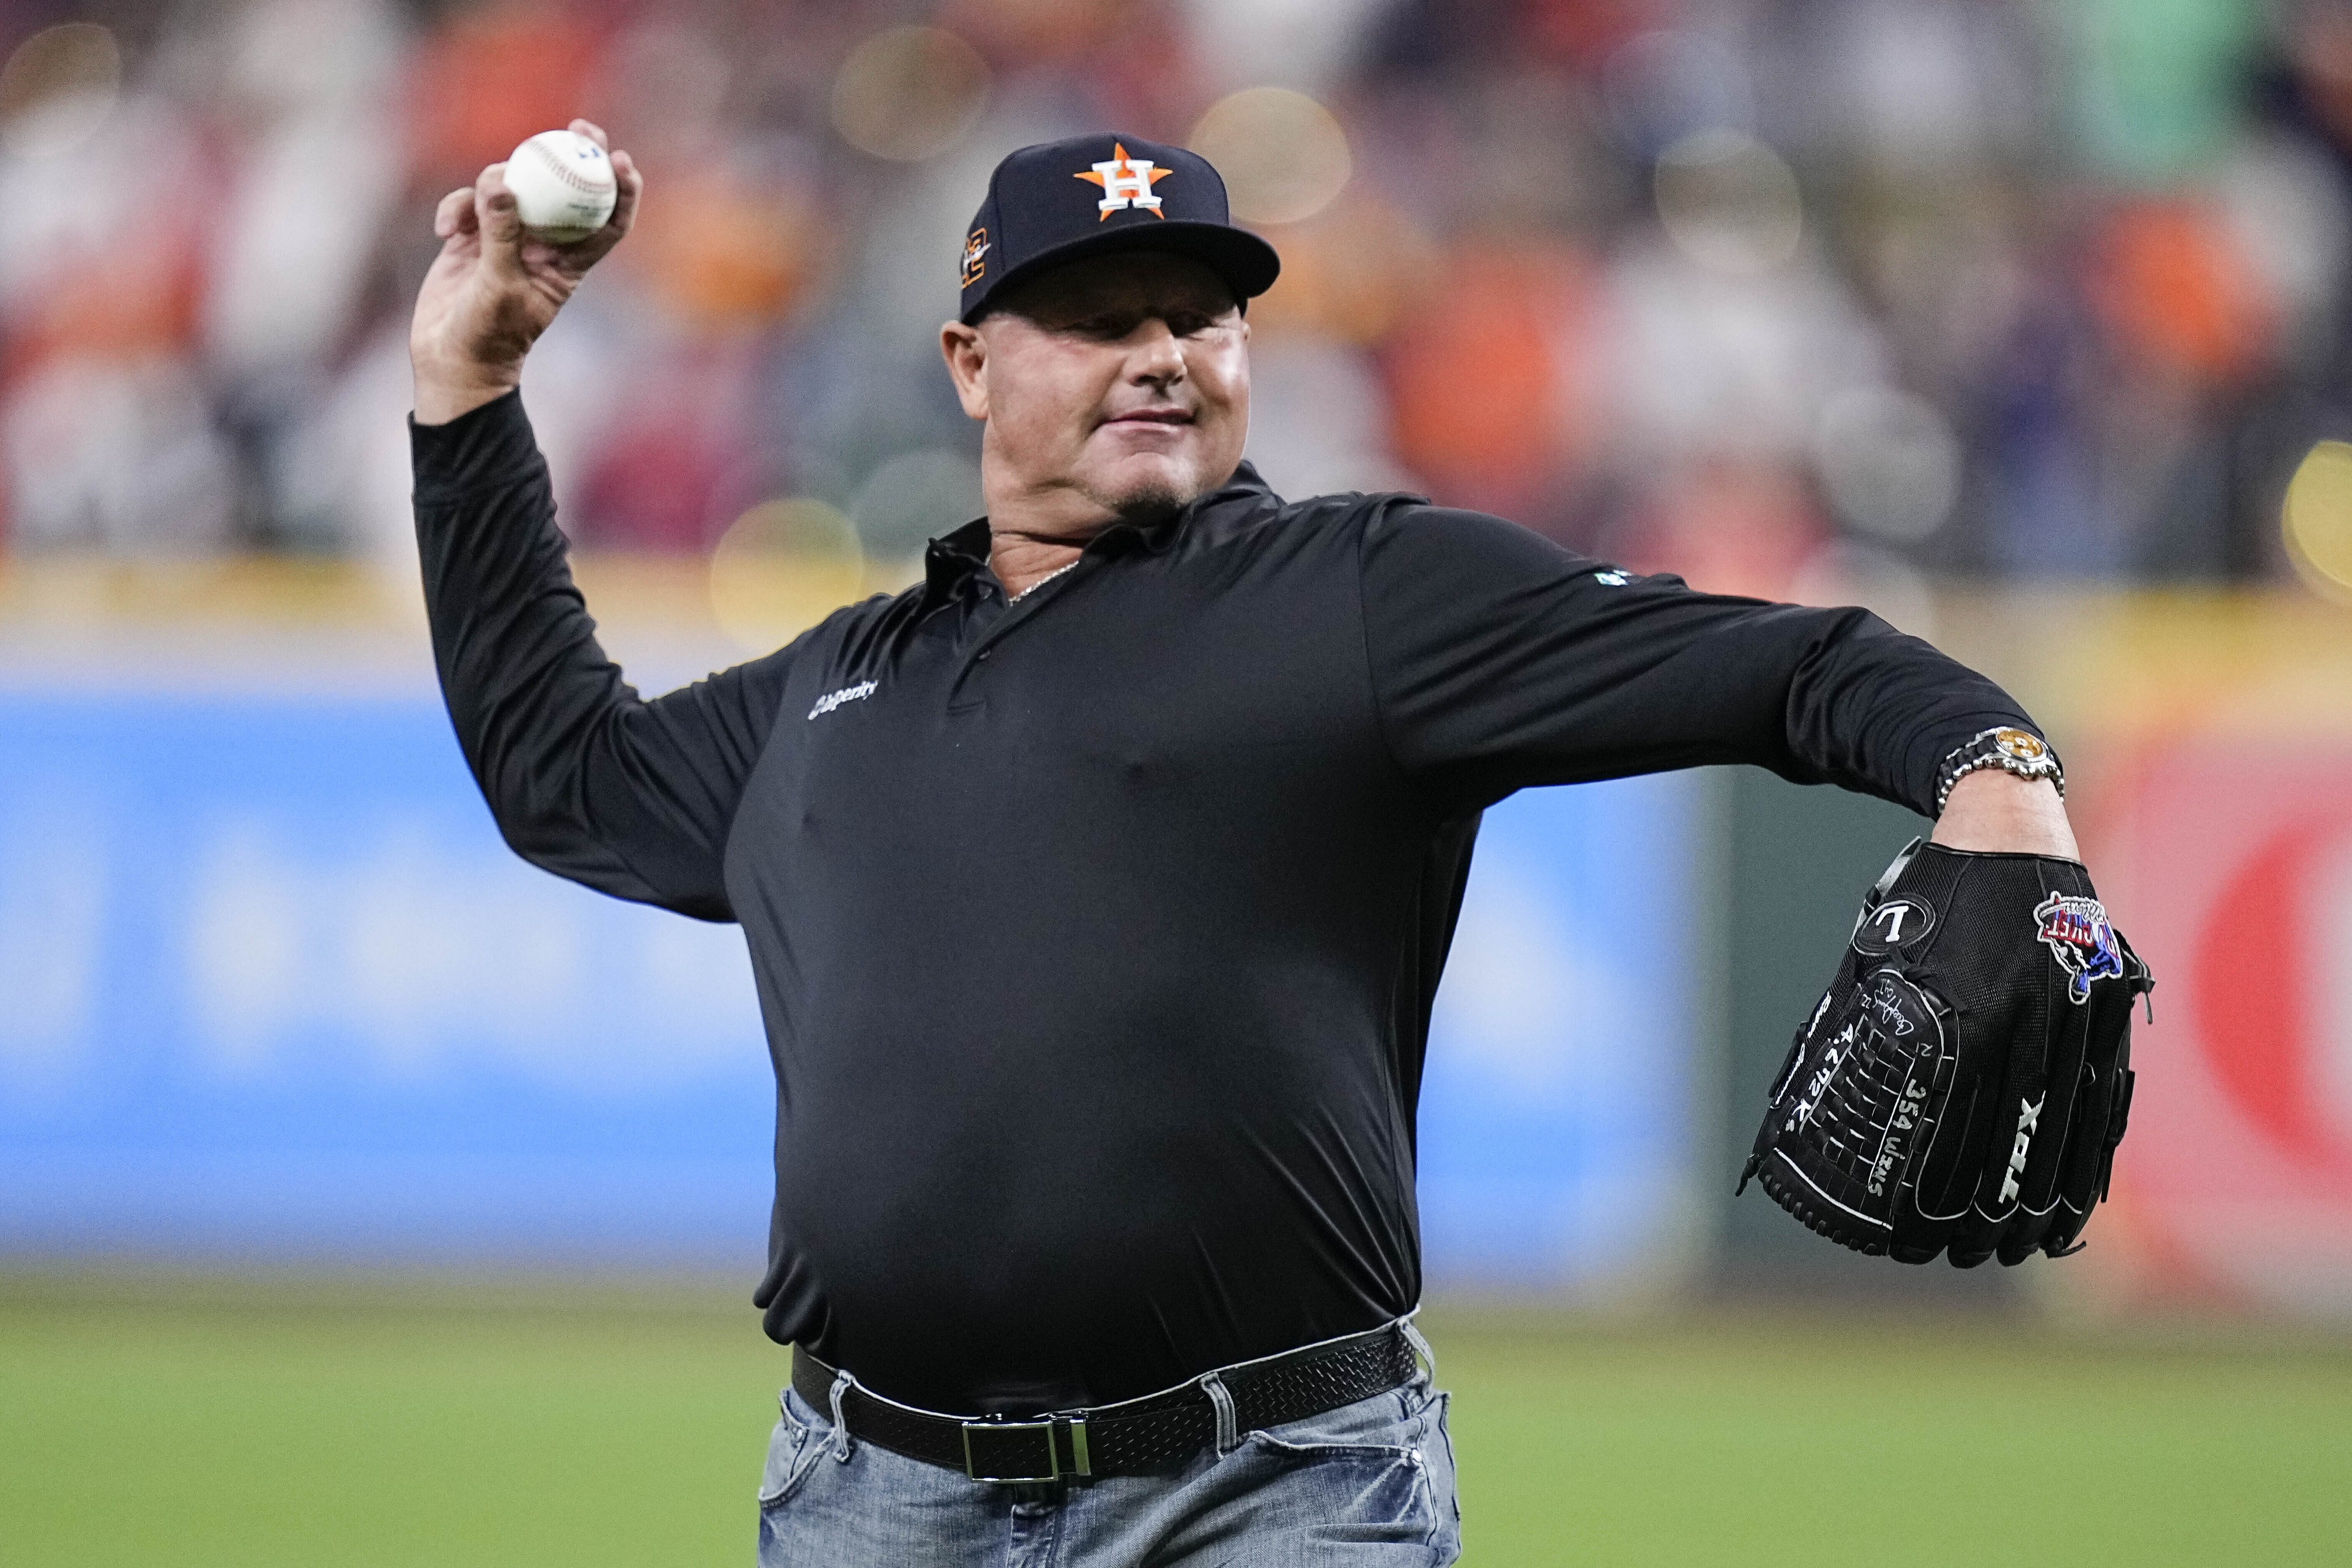 Roger Clemens throws batting practice to the Astros, is not in the